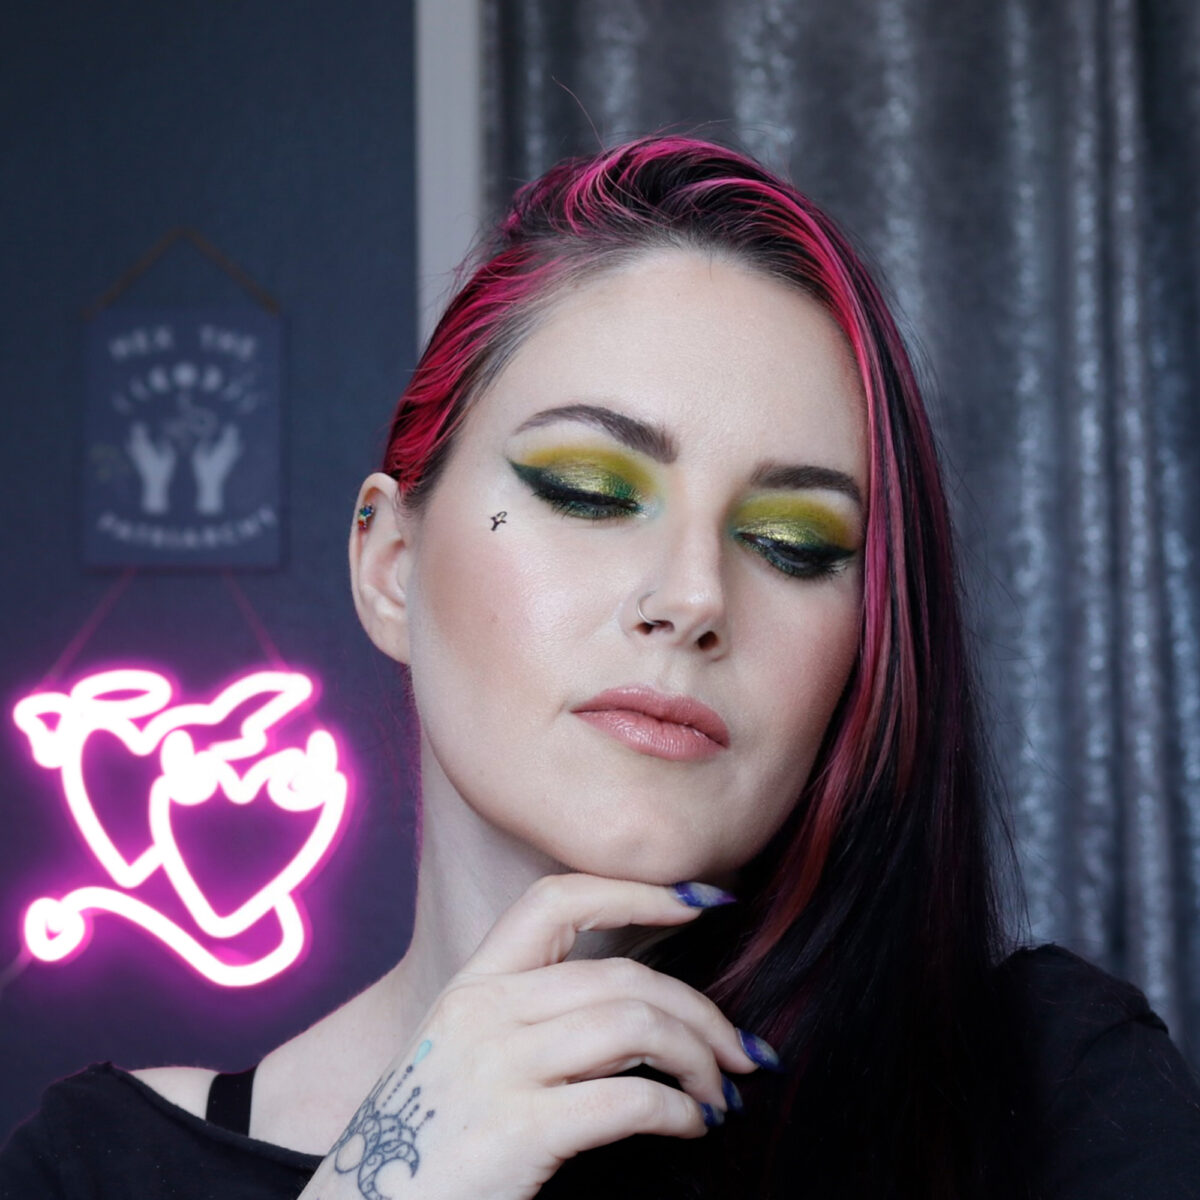 Edgy Makeup Inspiration featuring About Face Holographic Eye Paint in Luna